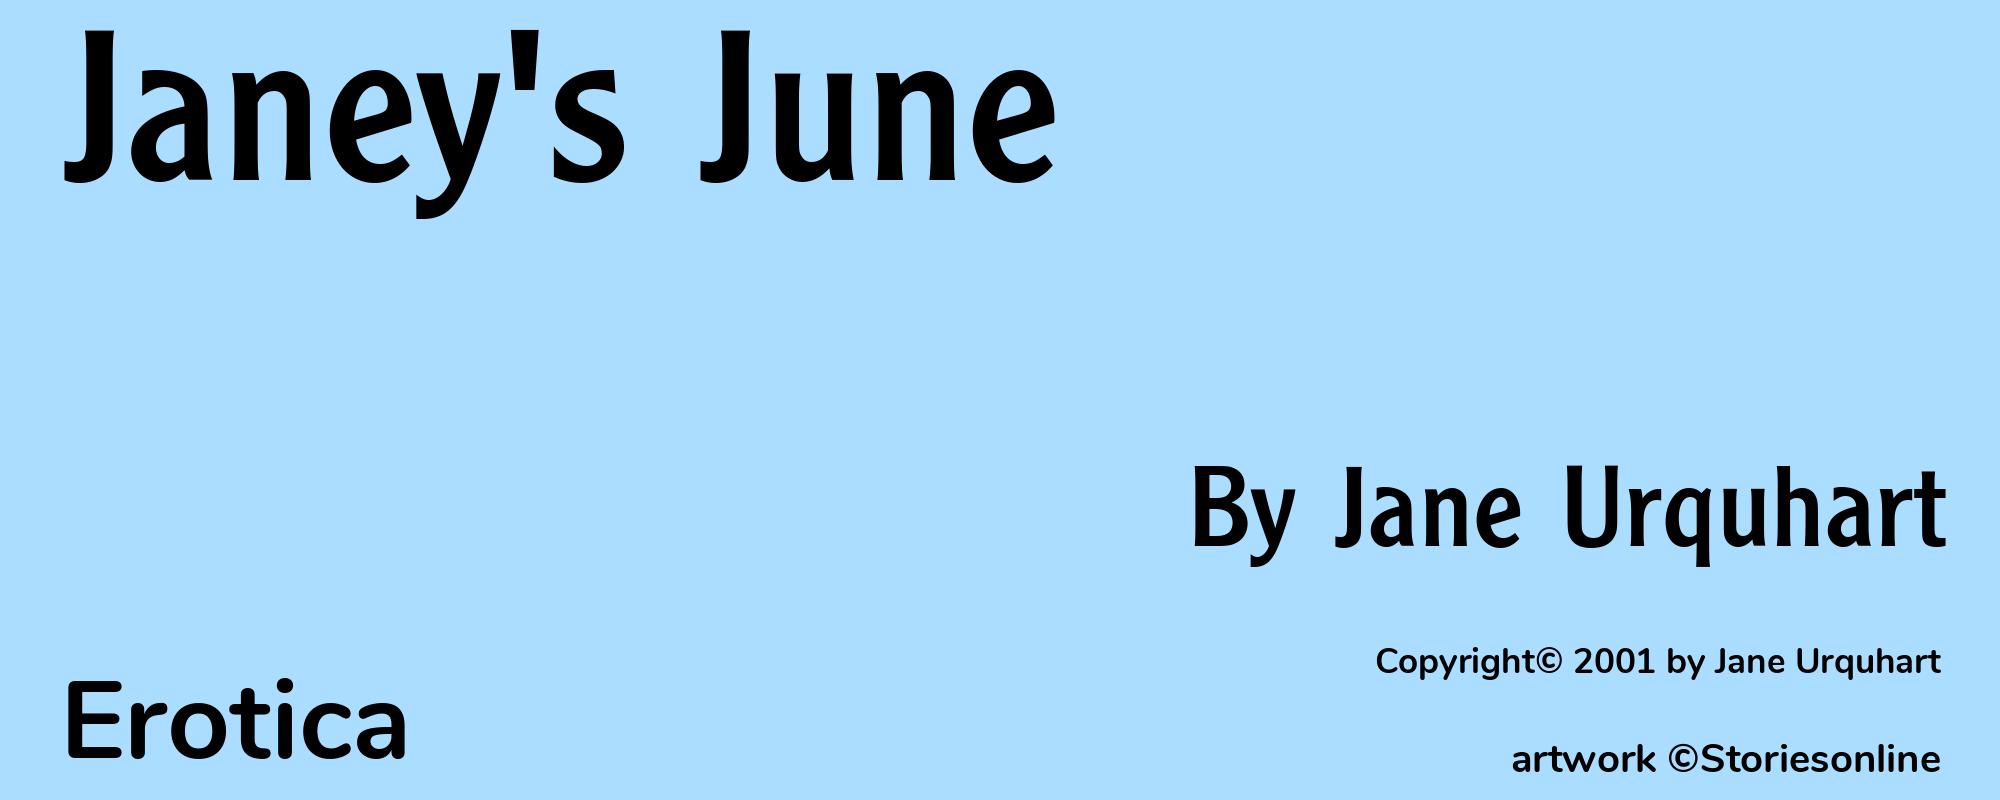 Janey's June - Cover